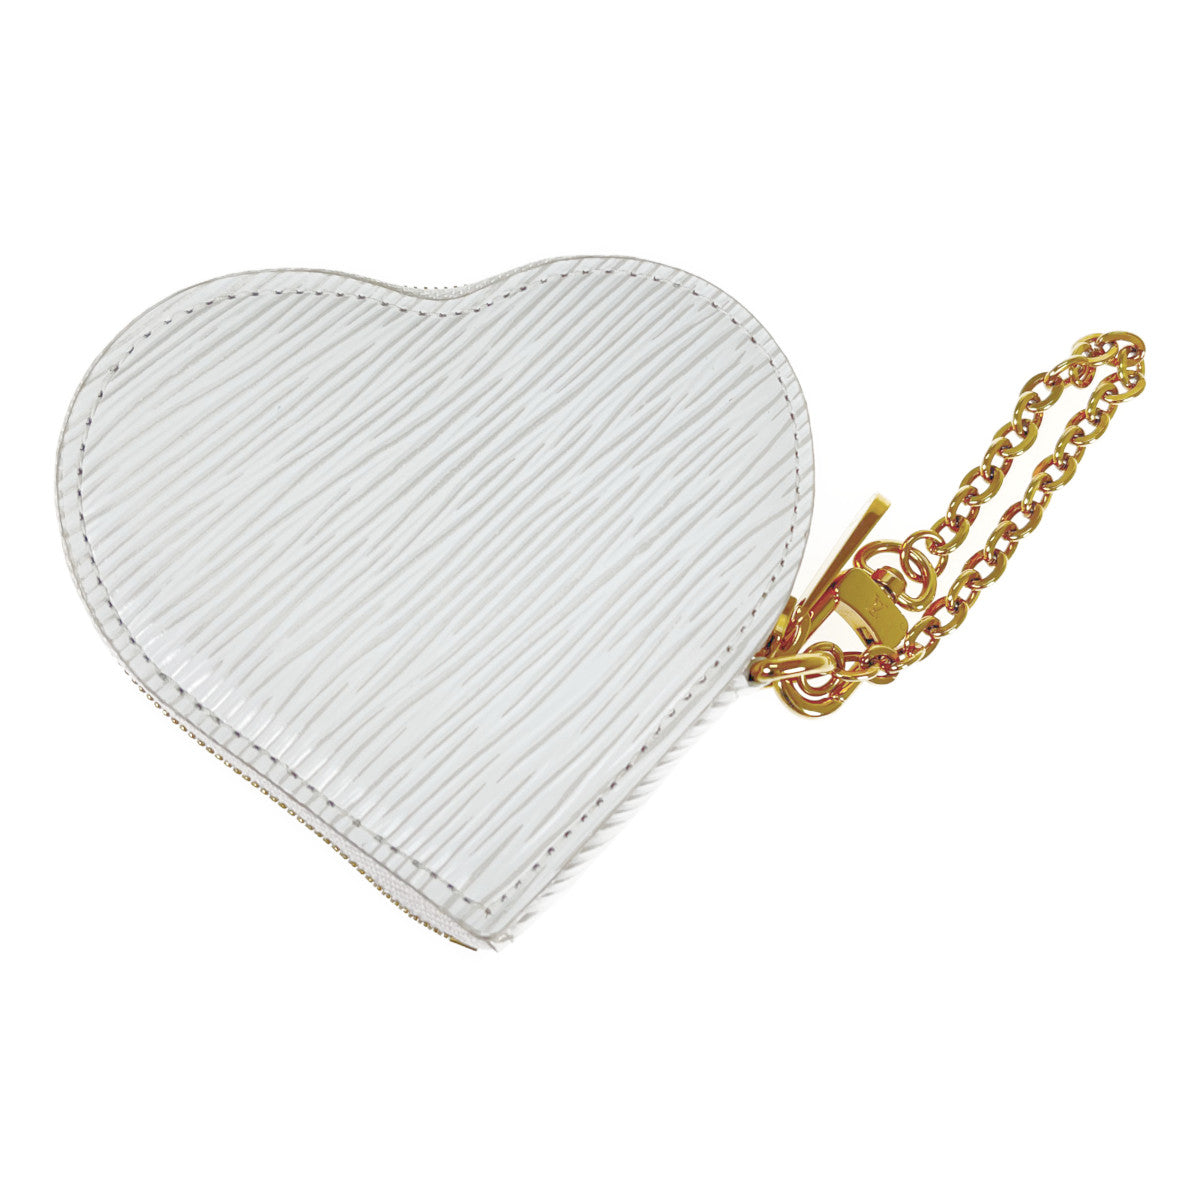 Louis Vuitton Love Lock Heart Coin Purse Leather Coin Case M63996 in Excellent condition